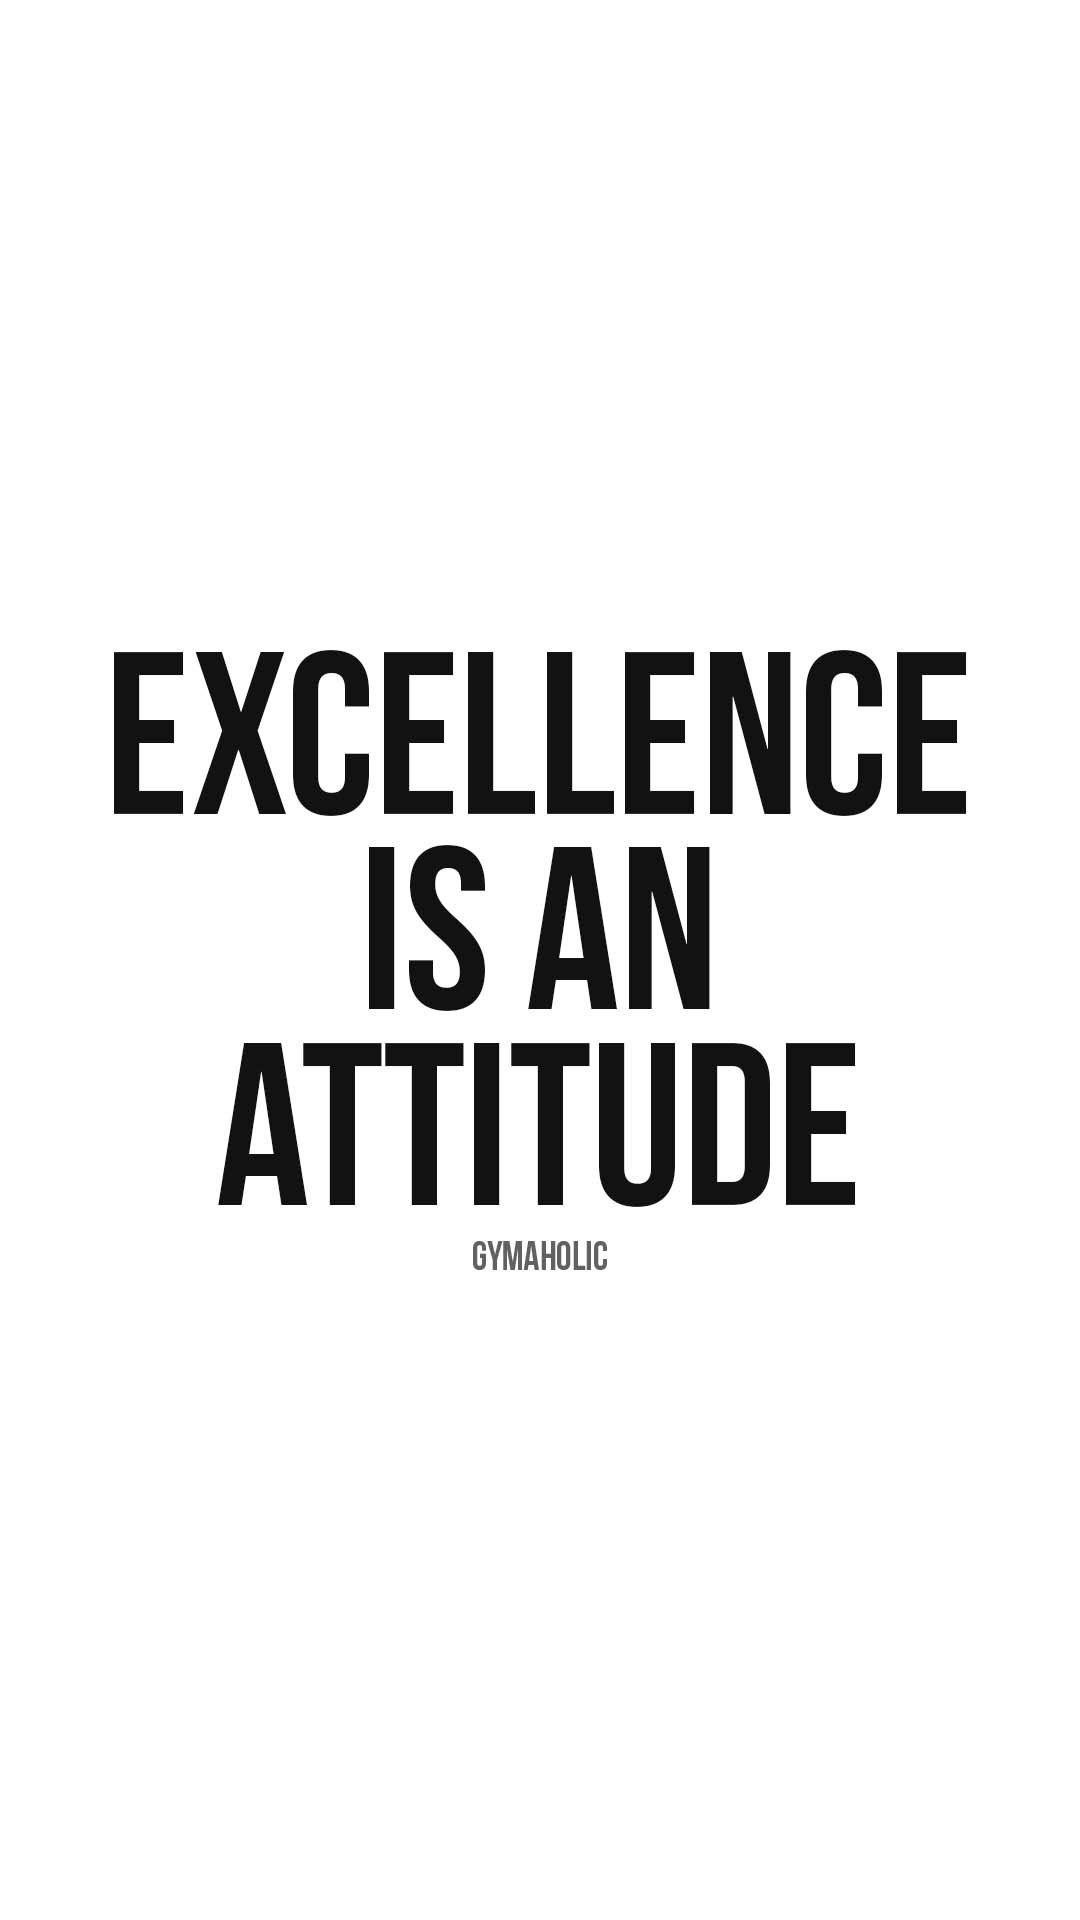 Excellence is an attitude